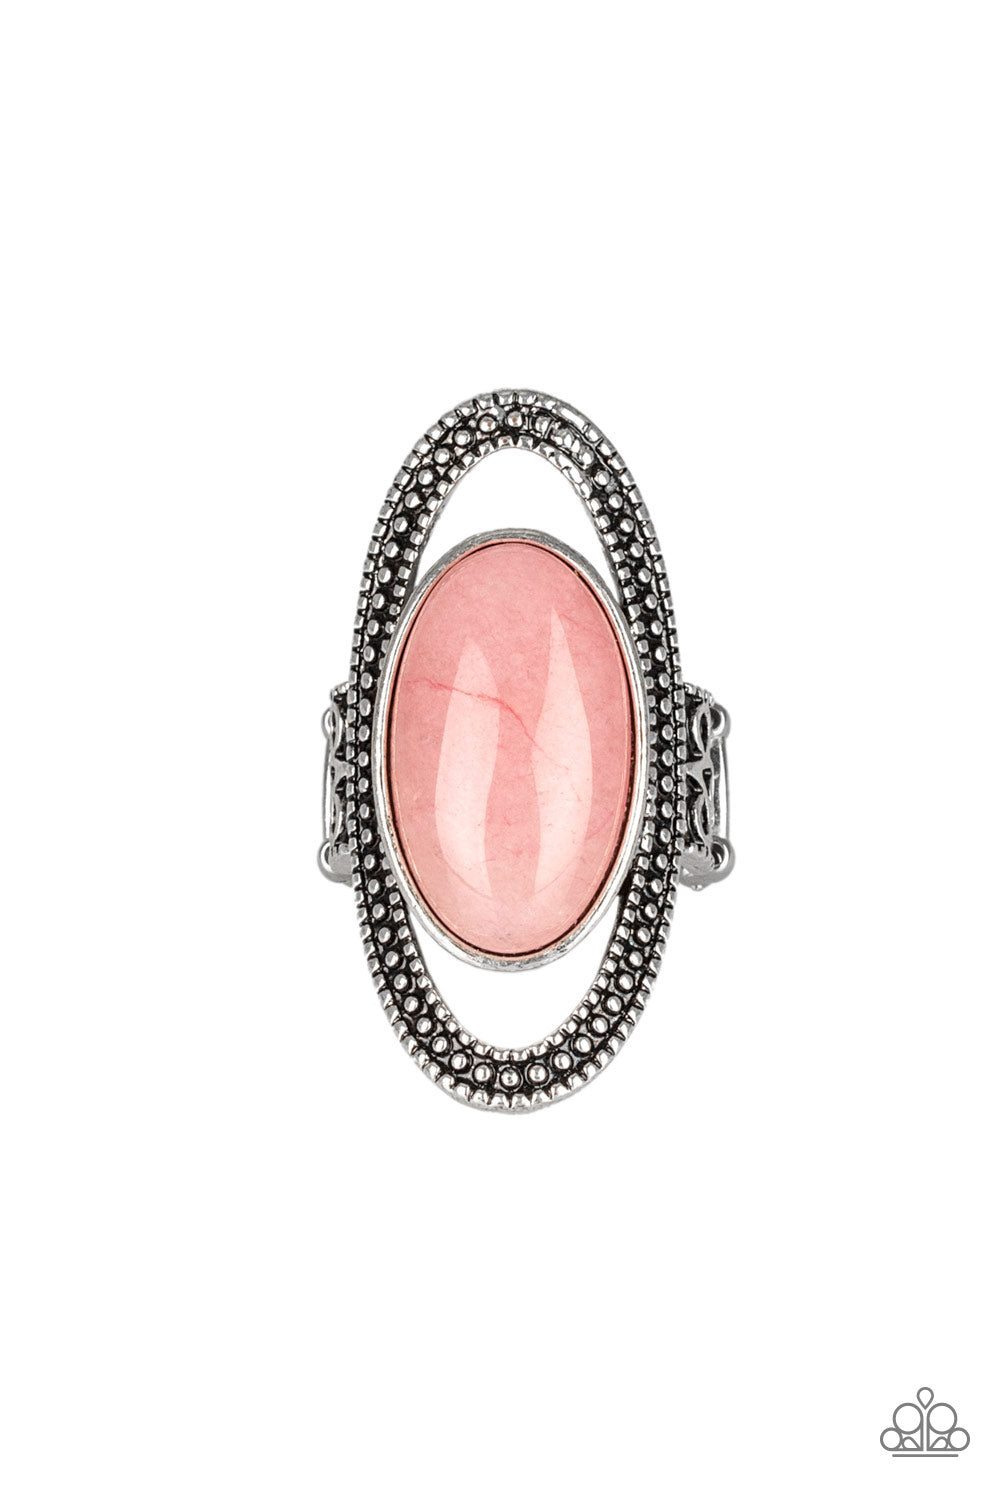 Western Royalty Pink Paparazzi Ring Cashmere Pink Jewels - Cashmere Pink Jewels & Accessories, Cashmere Pink Jewels & Accessories - Paparazzi